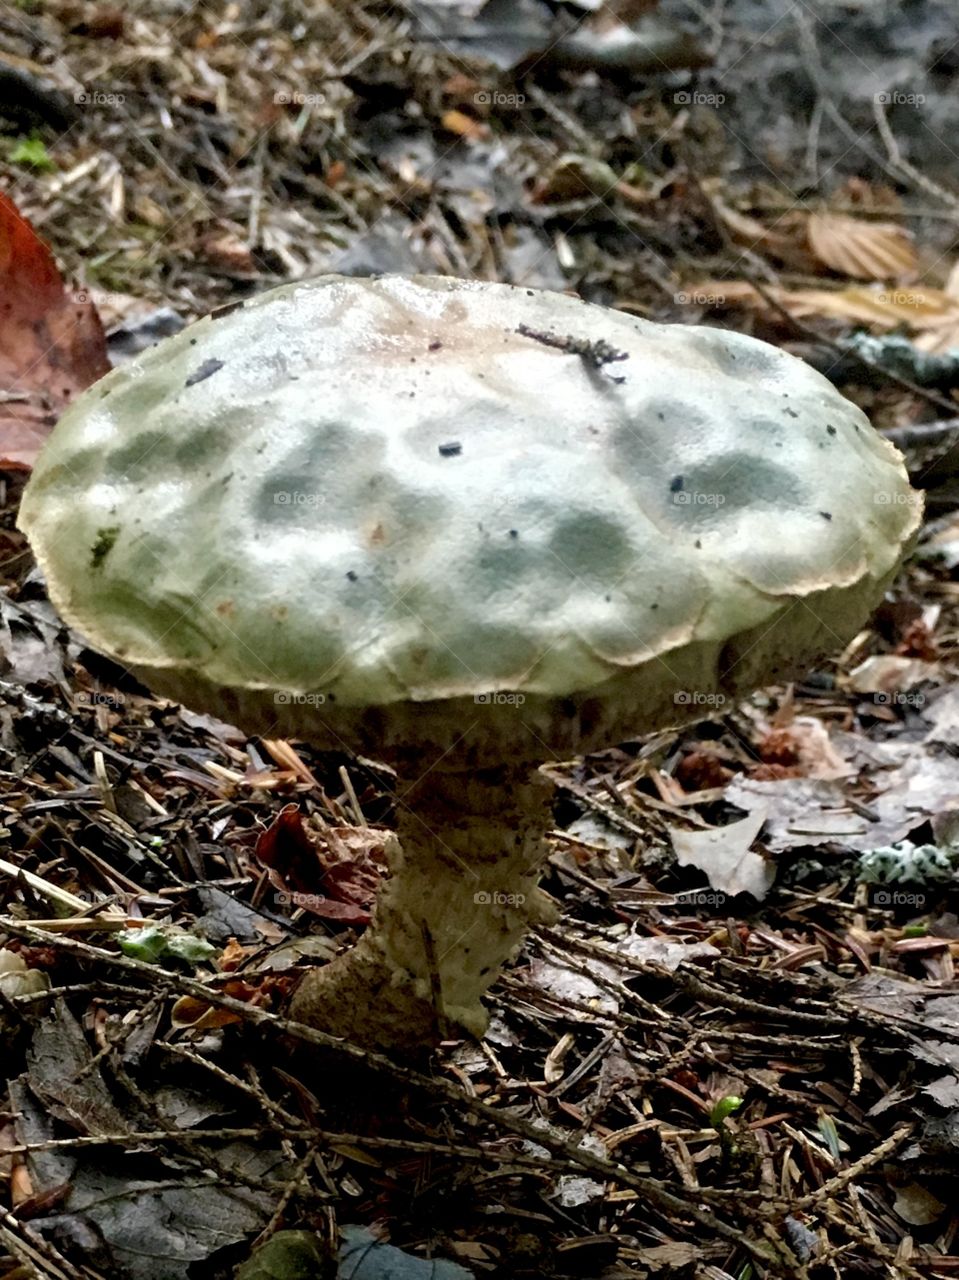 White birch bolete. If any mushroom looks poisonous, it’s this one. Apparently it is edible 